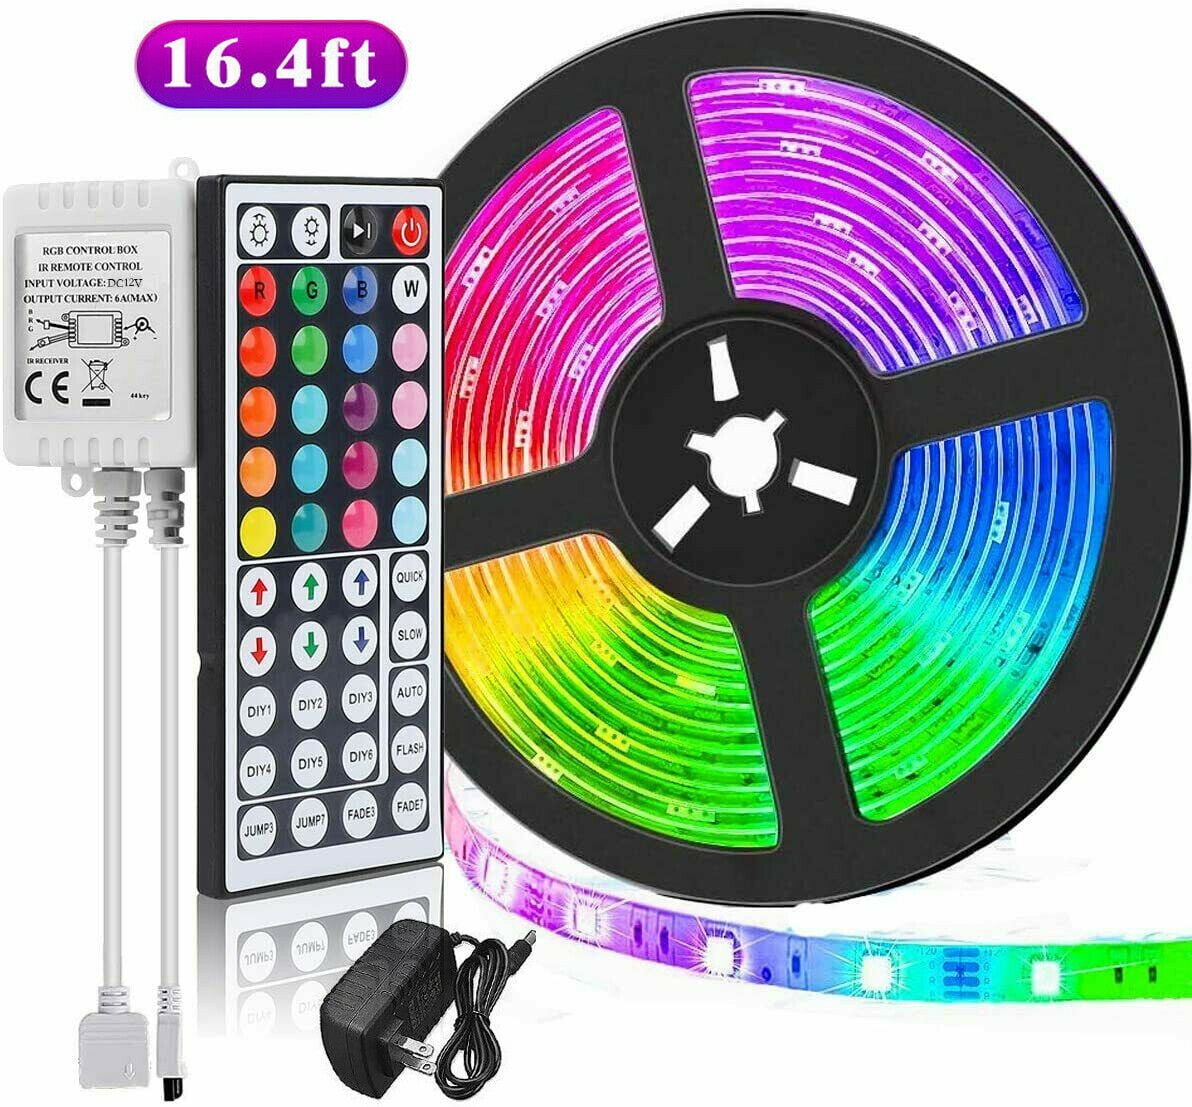 16.4ft RGB W White 5050 300 Waterproof LED Strip Light Remote Controller+Power 